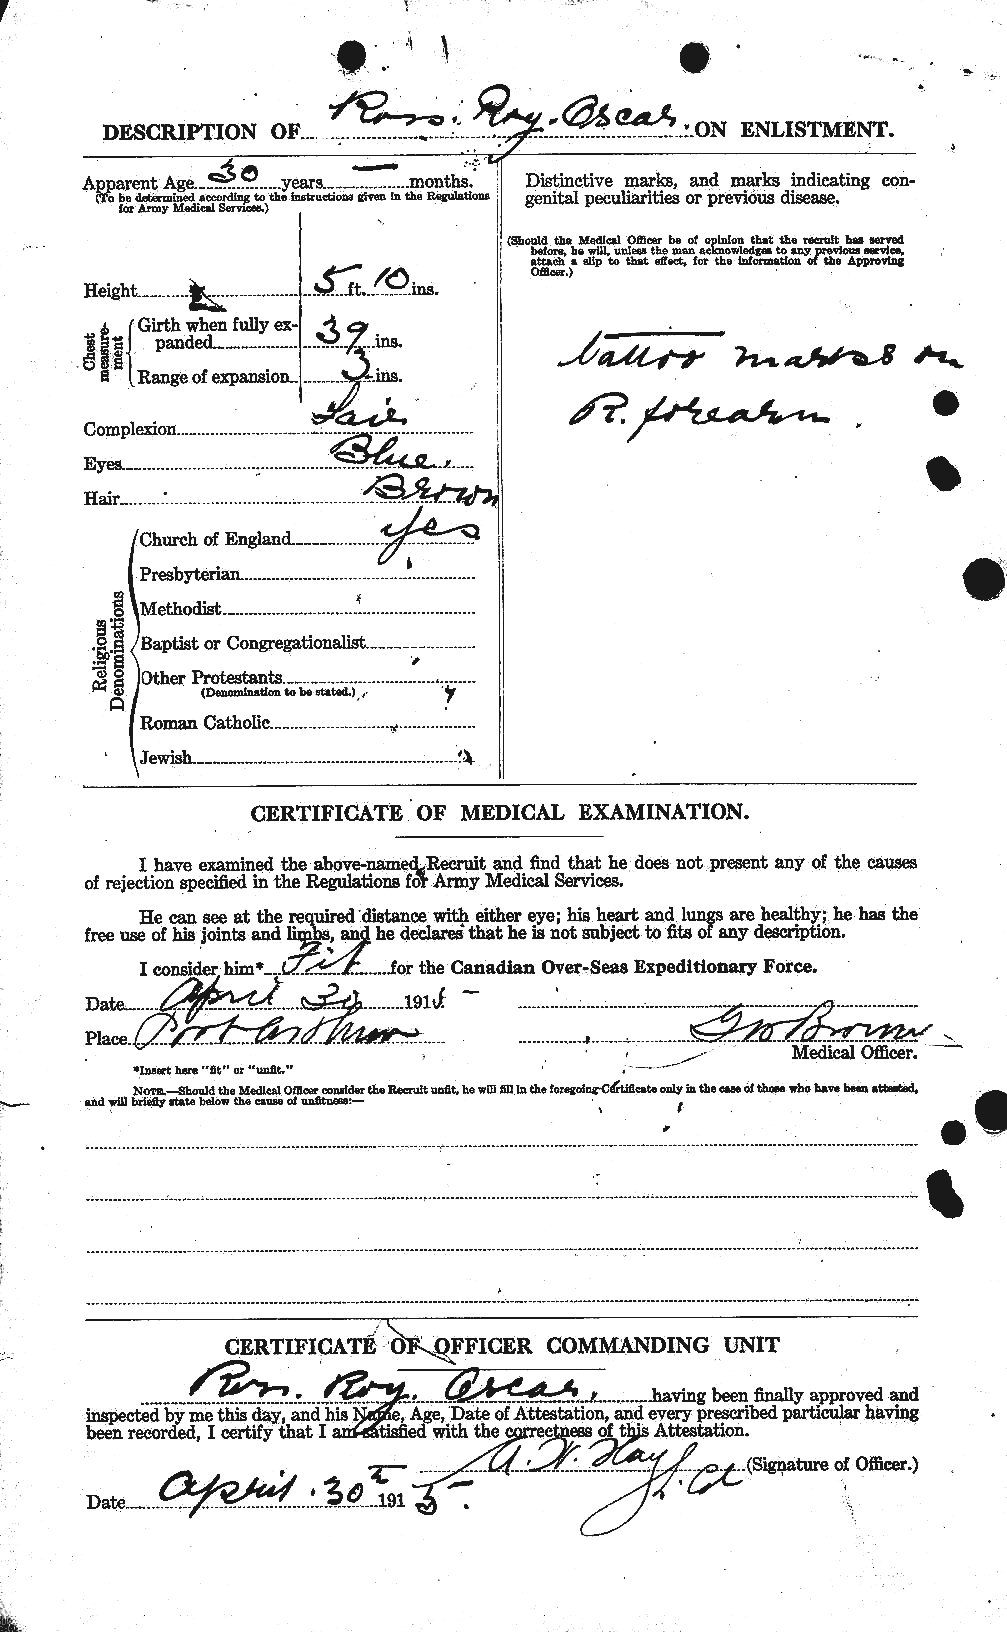 Personnel Records of the First World War - CEF 614009b